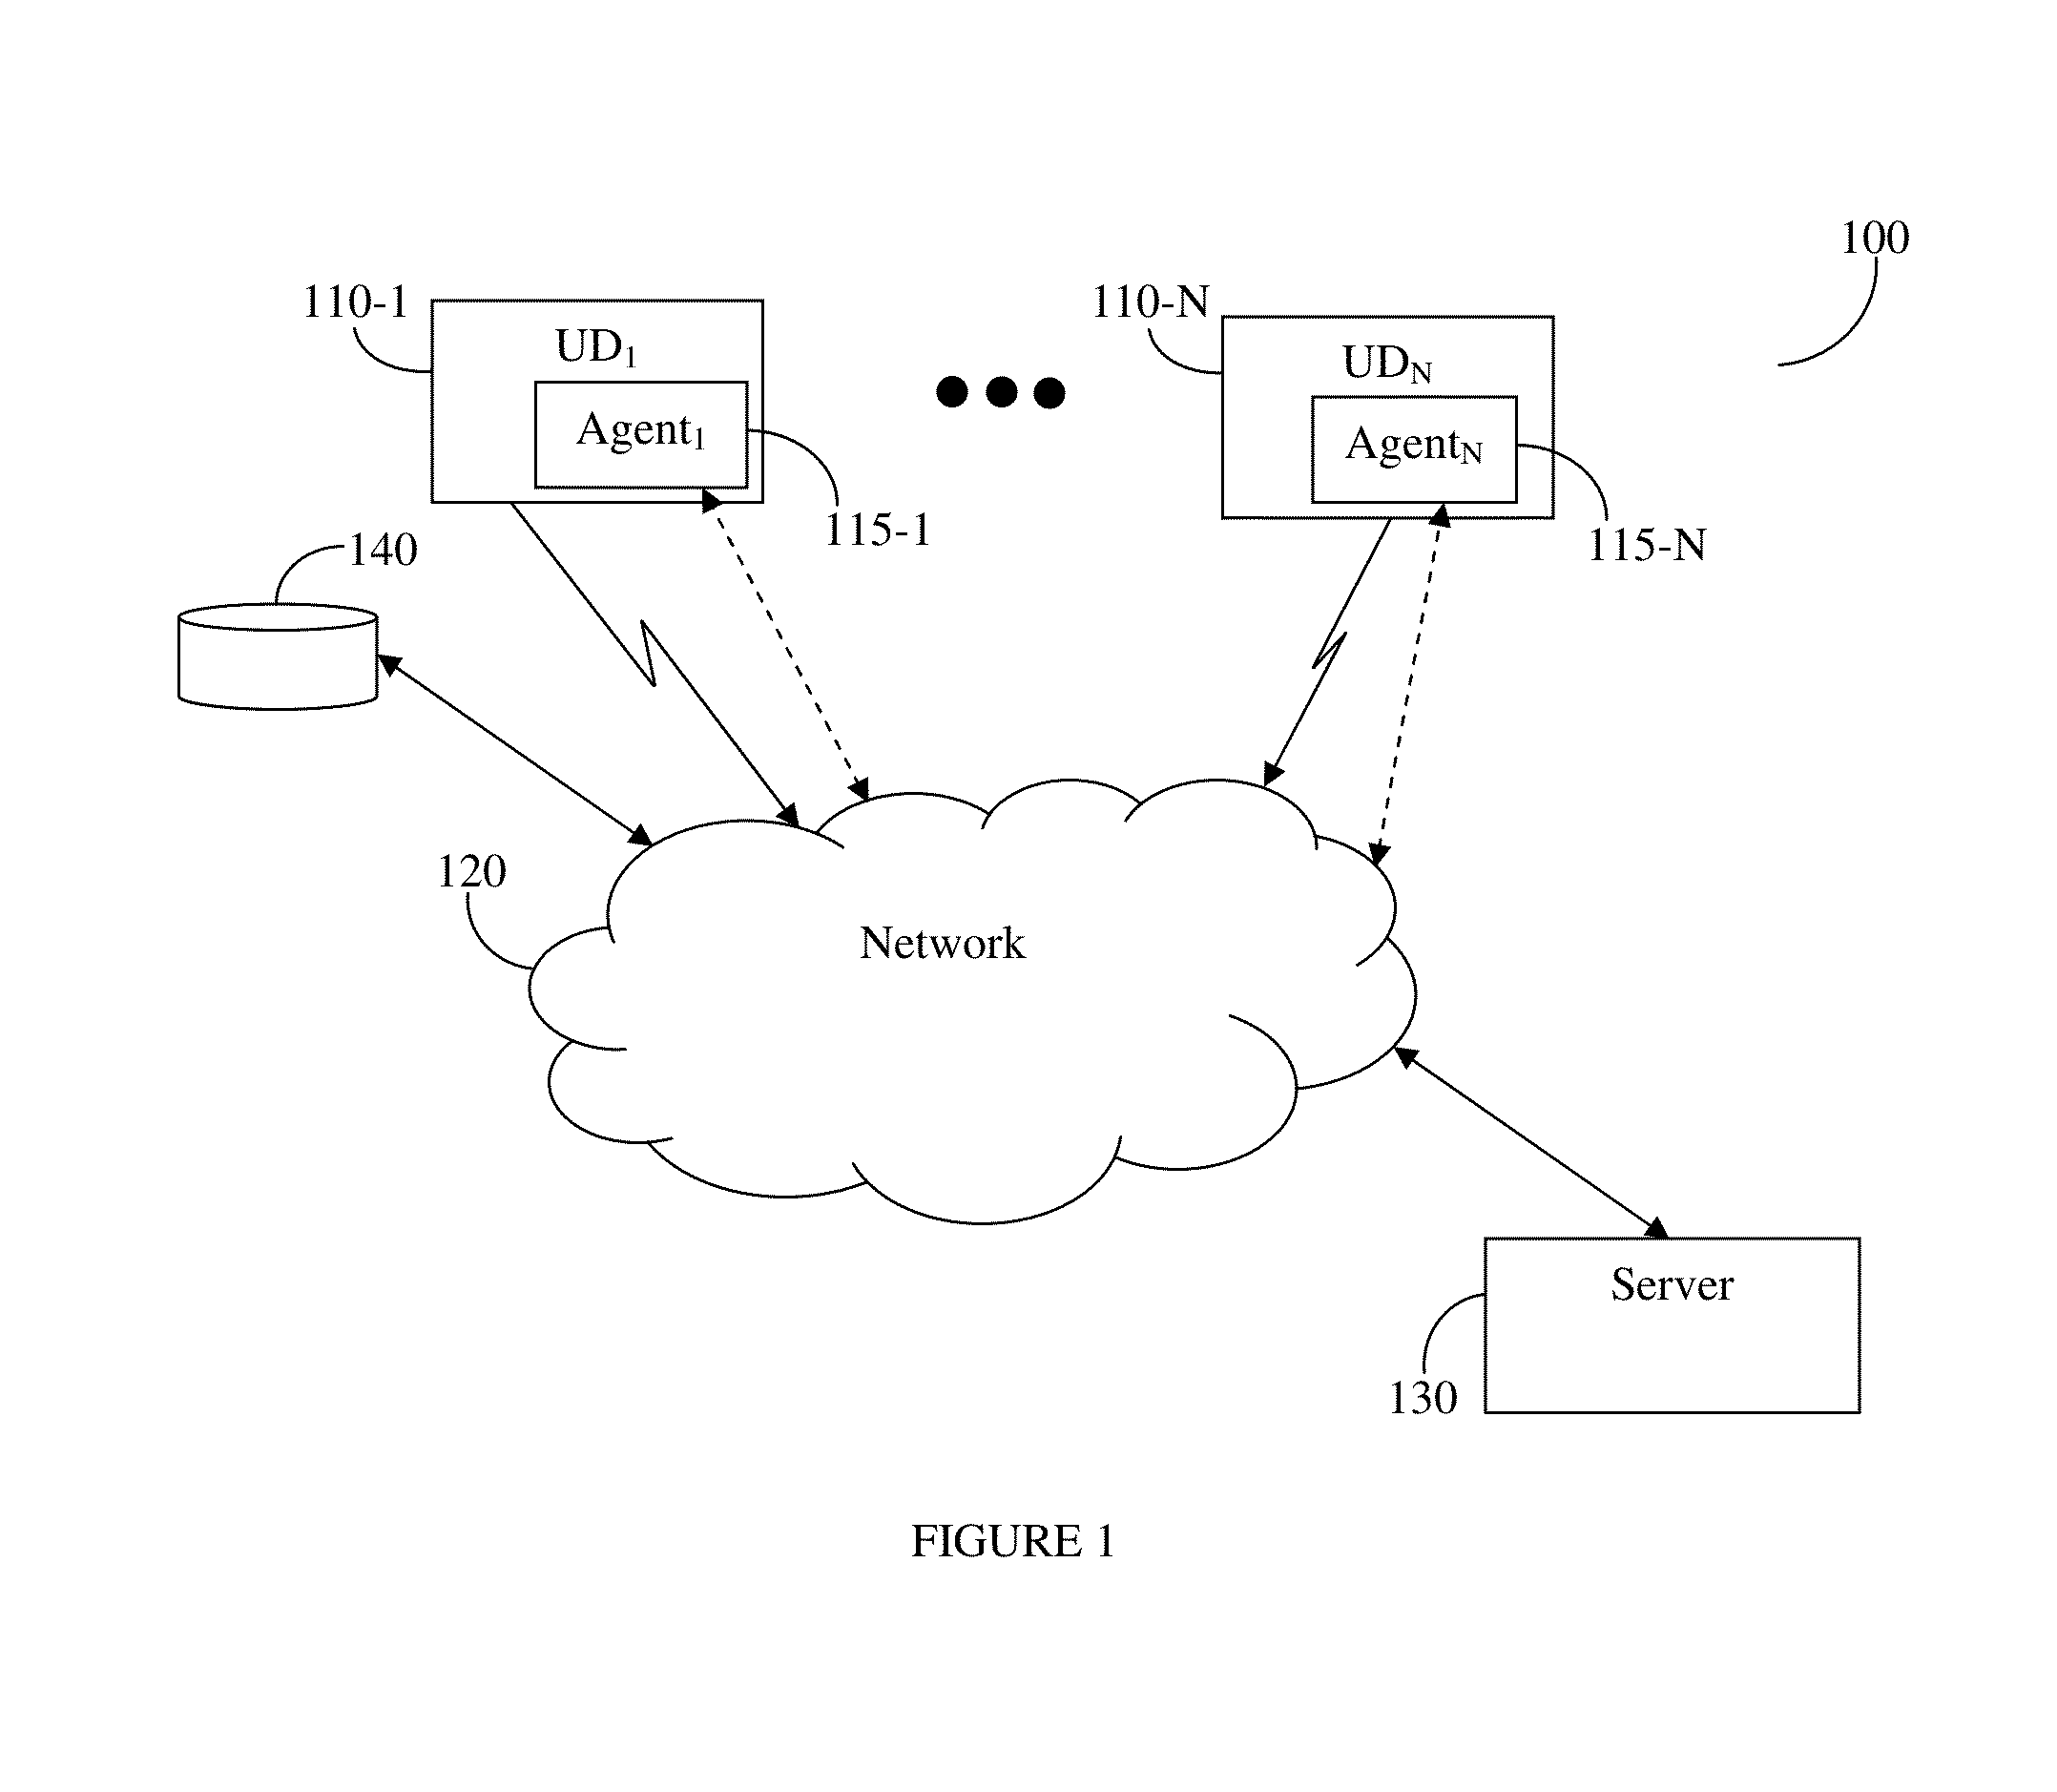 System and method thereof for identifying and responding to security incidents based on preemptive forensics